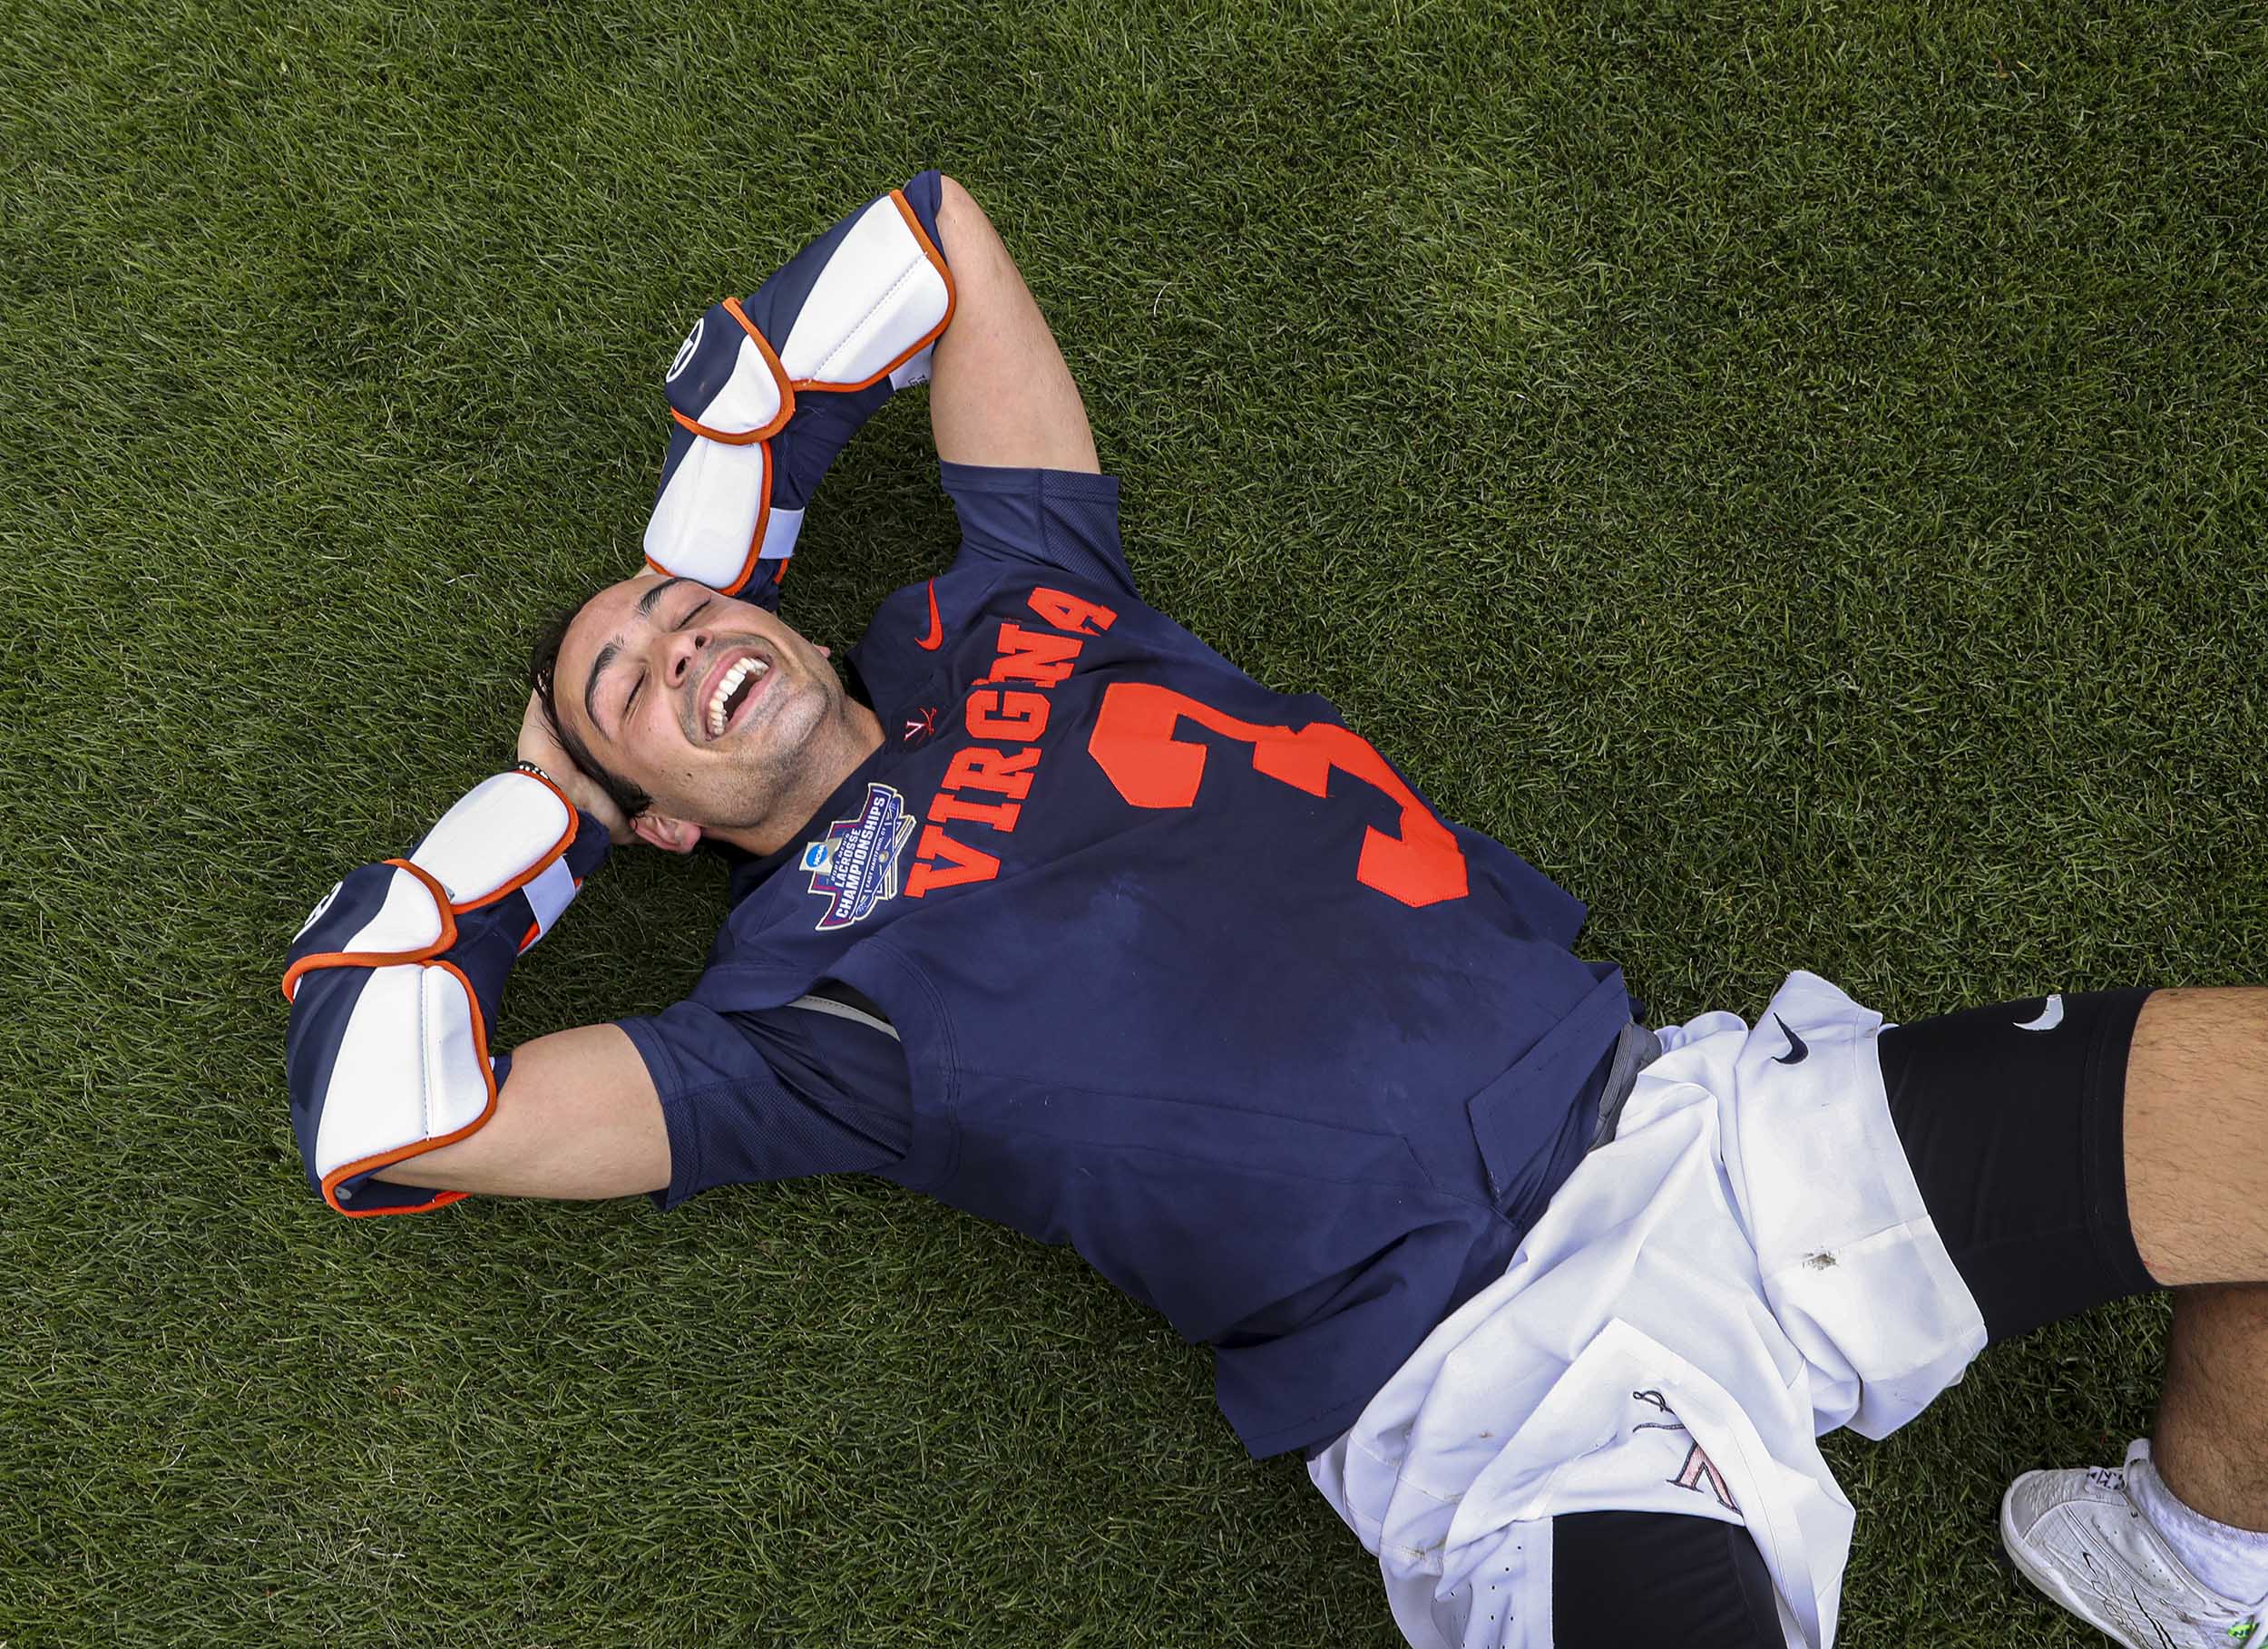 UVA player laying on the grass with arms above their head